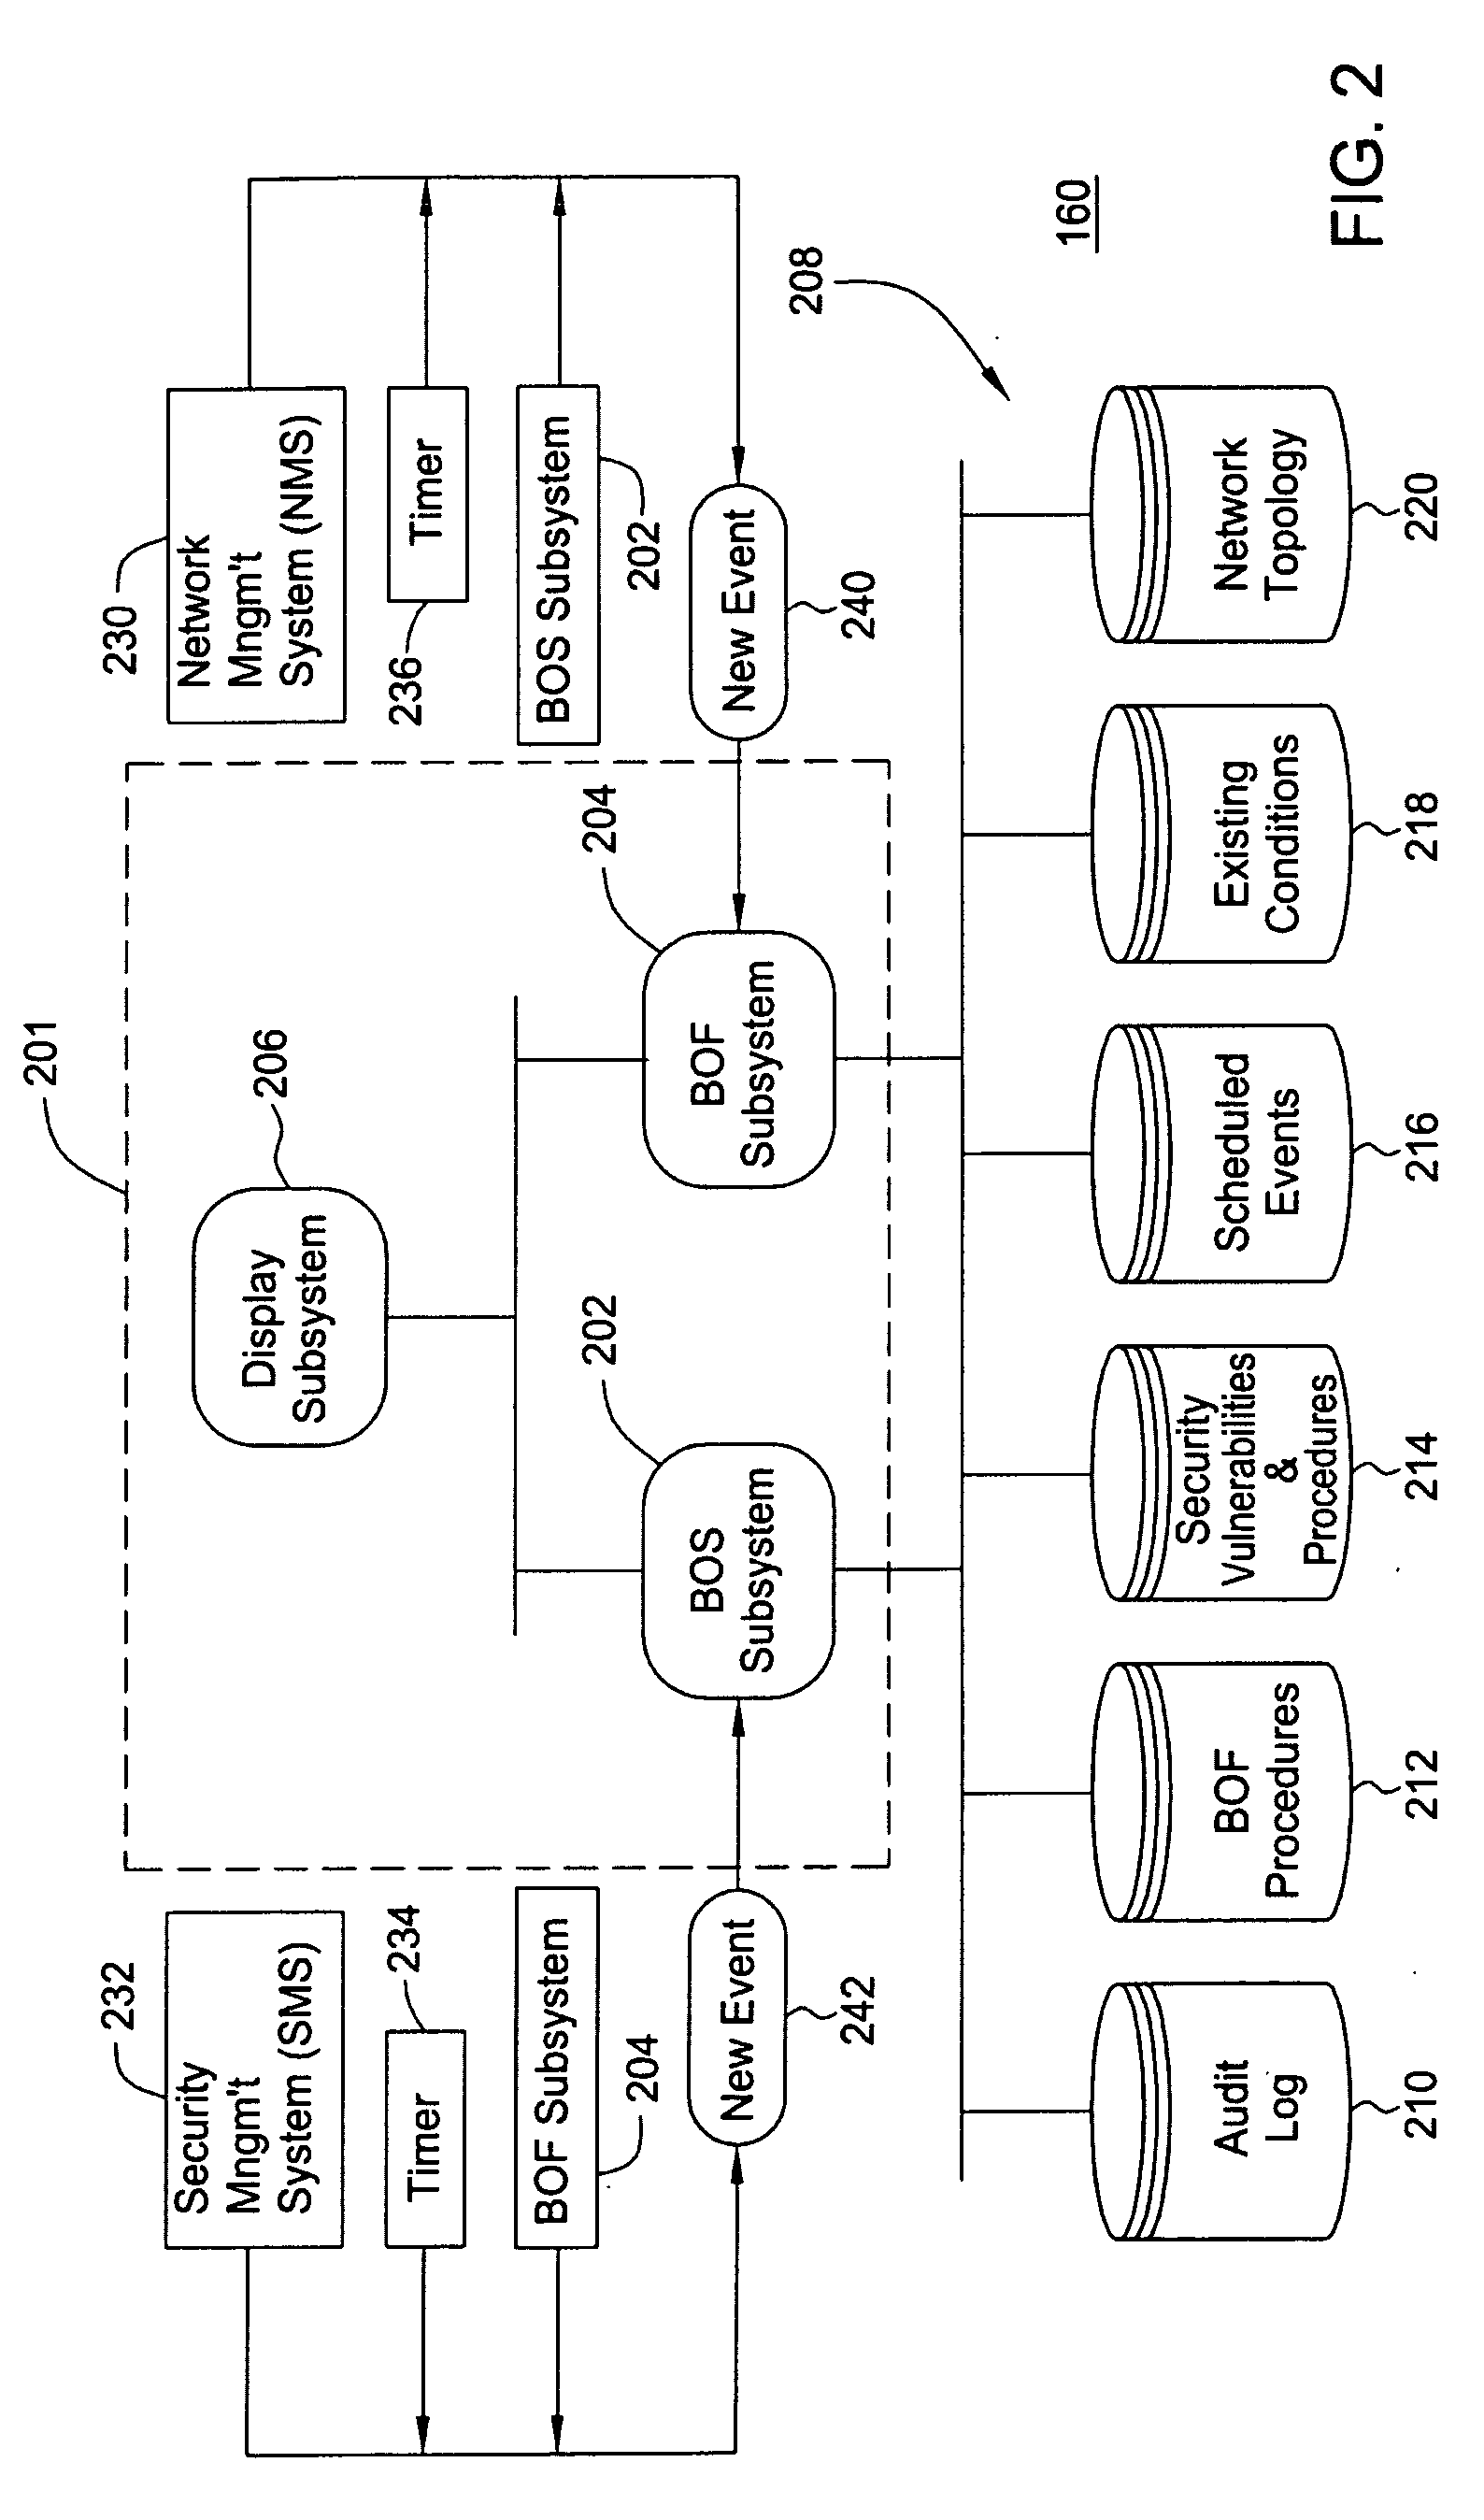 Brink of failure and breach of security detection and recovery system